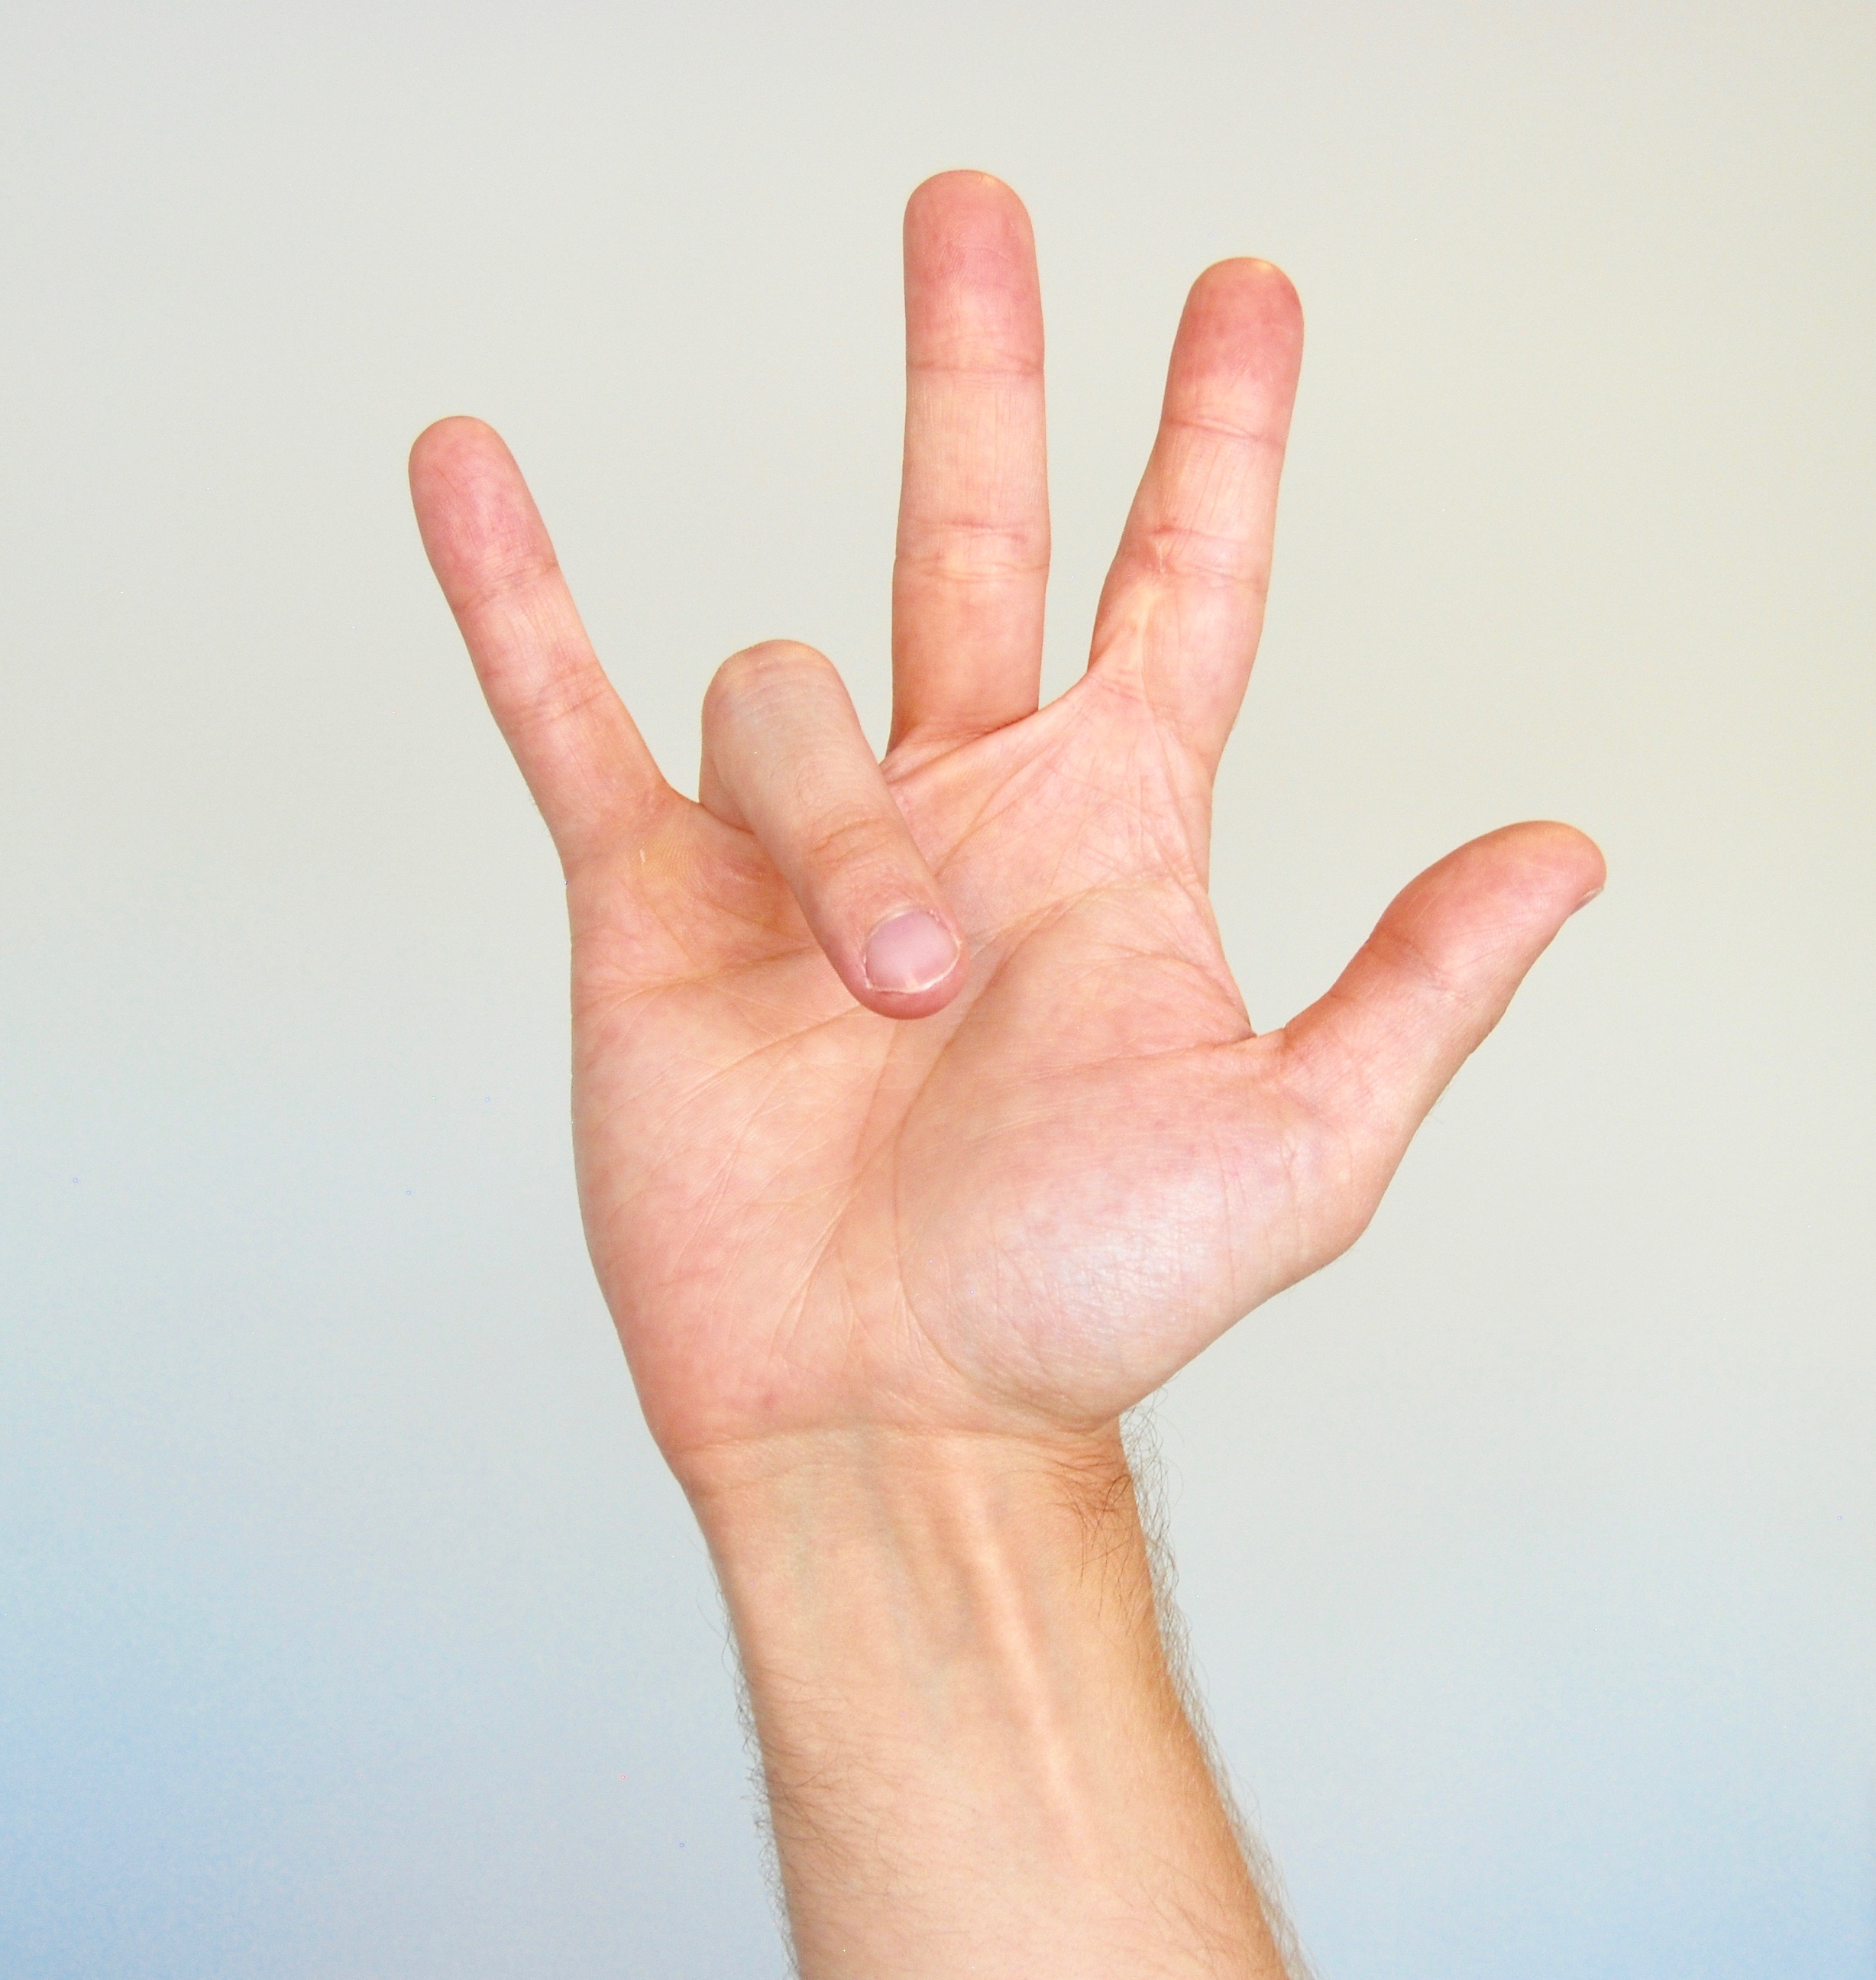 What does the 4 fingers sign mean? - Quora